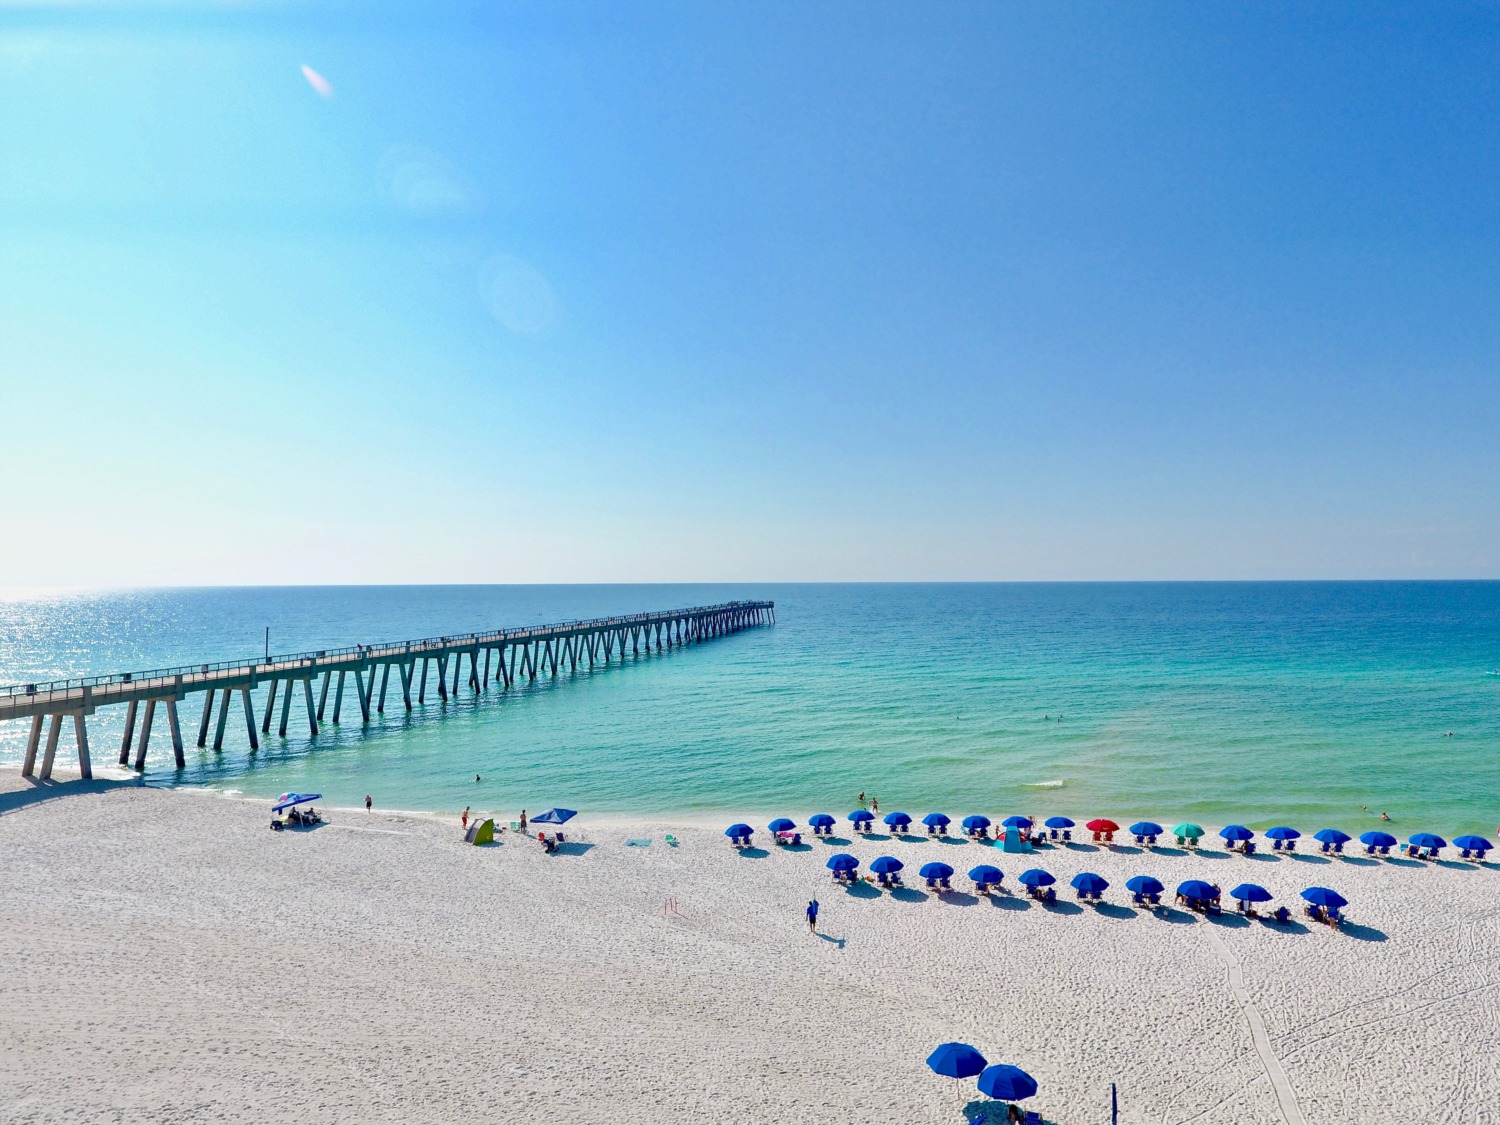 Navarre Beach! Tourism is up and new improvements on the Beach being